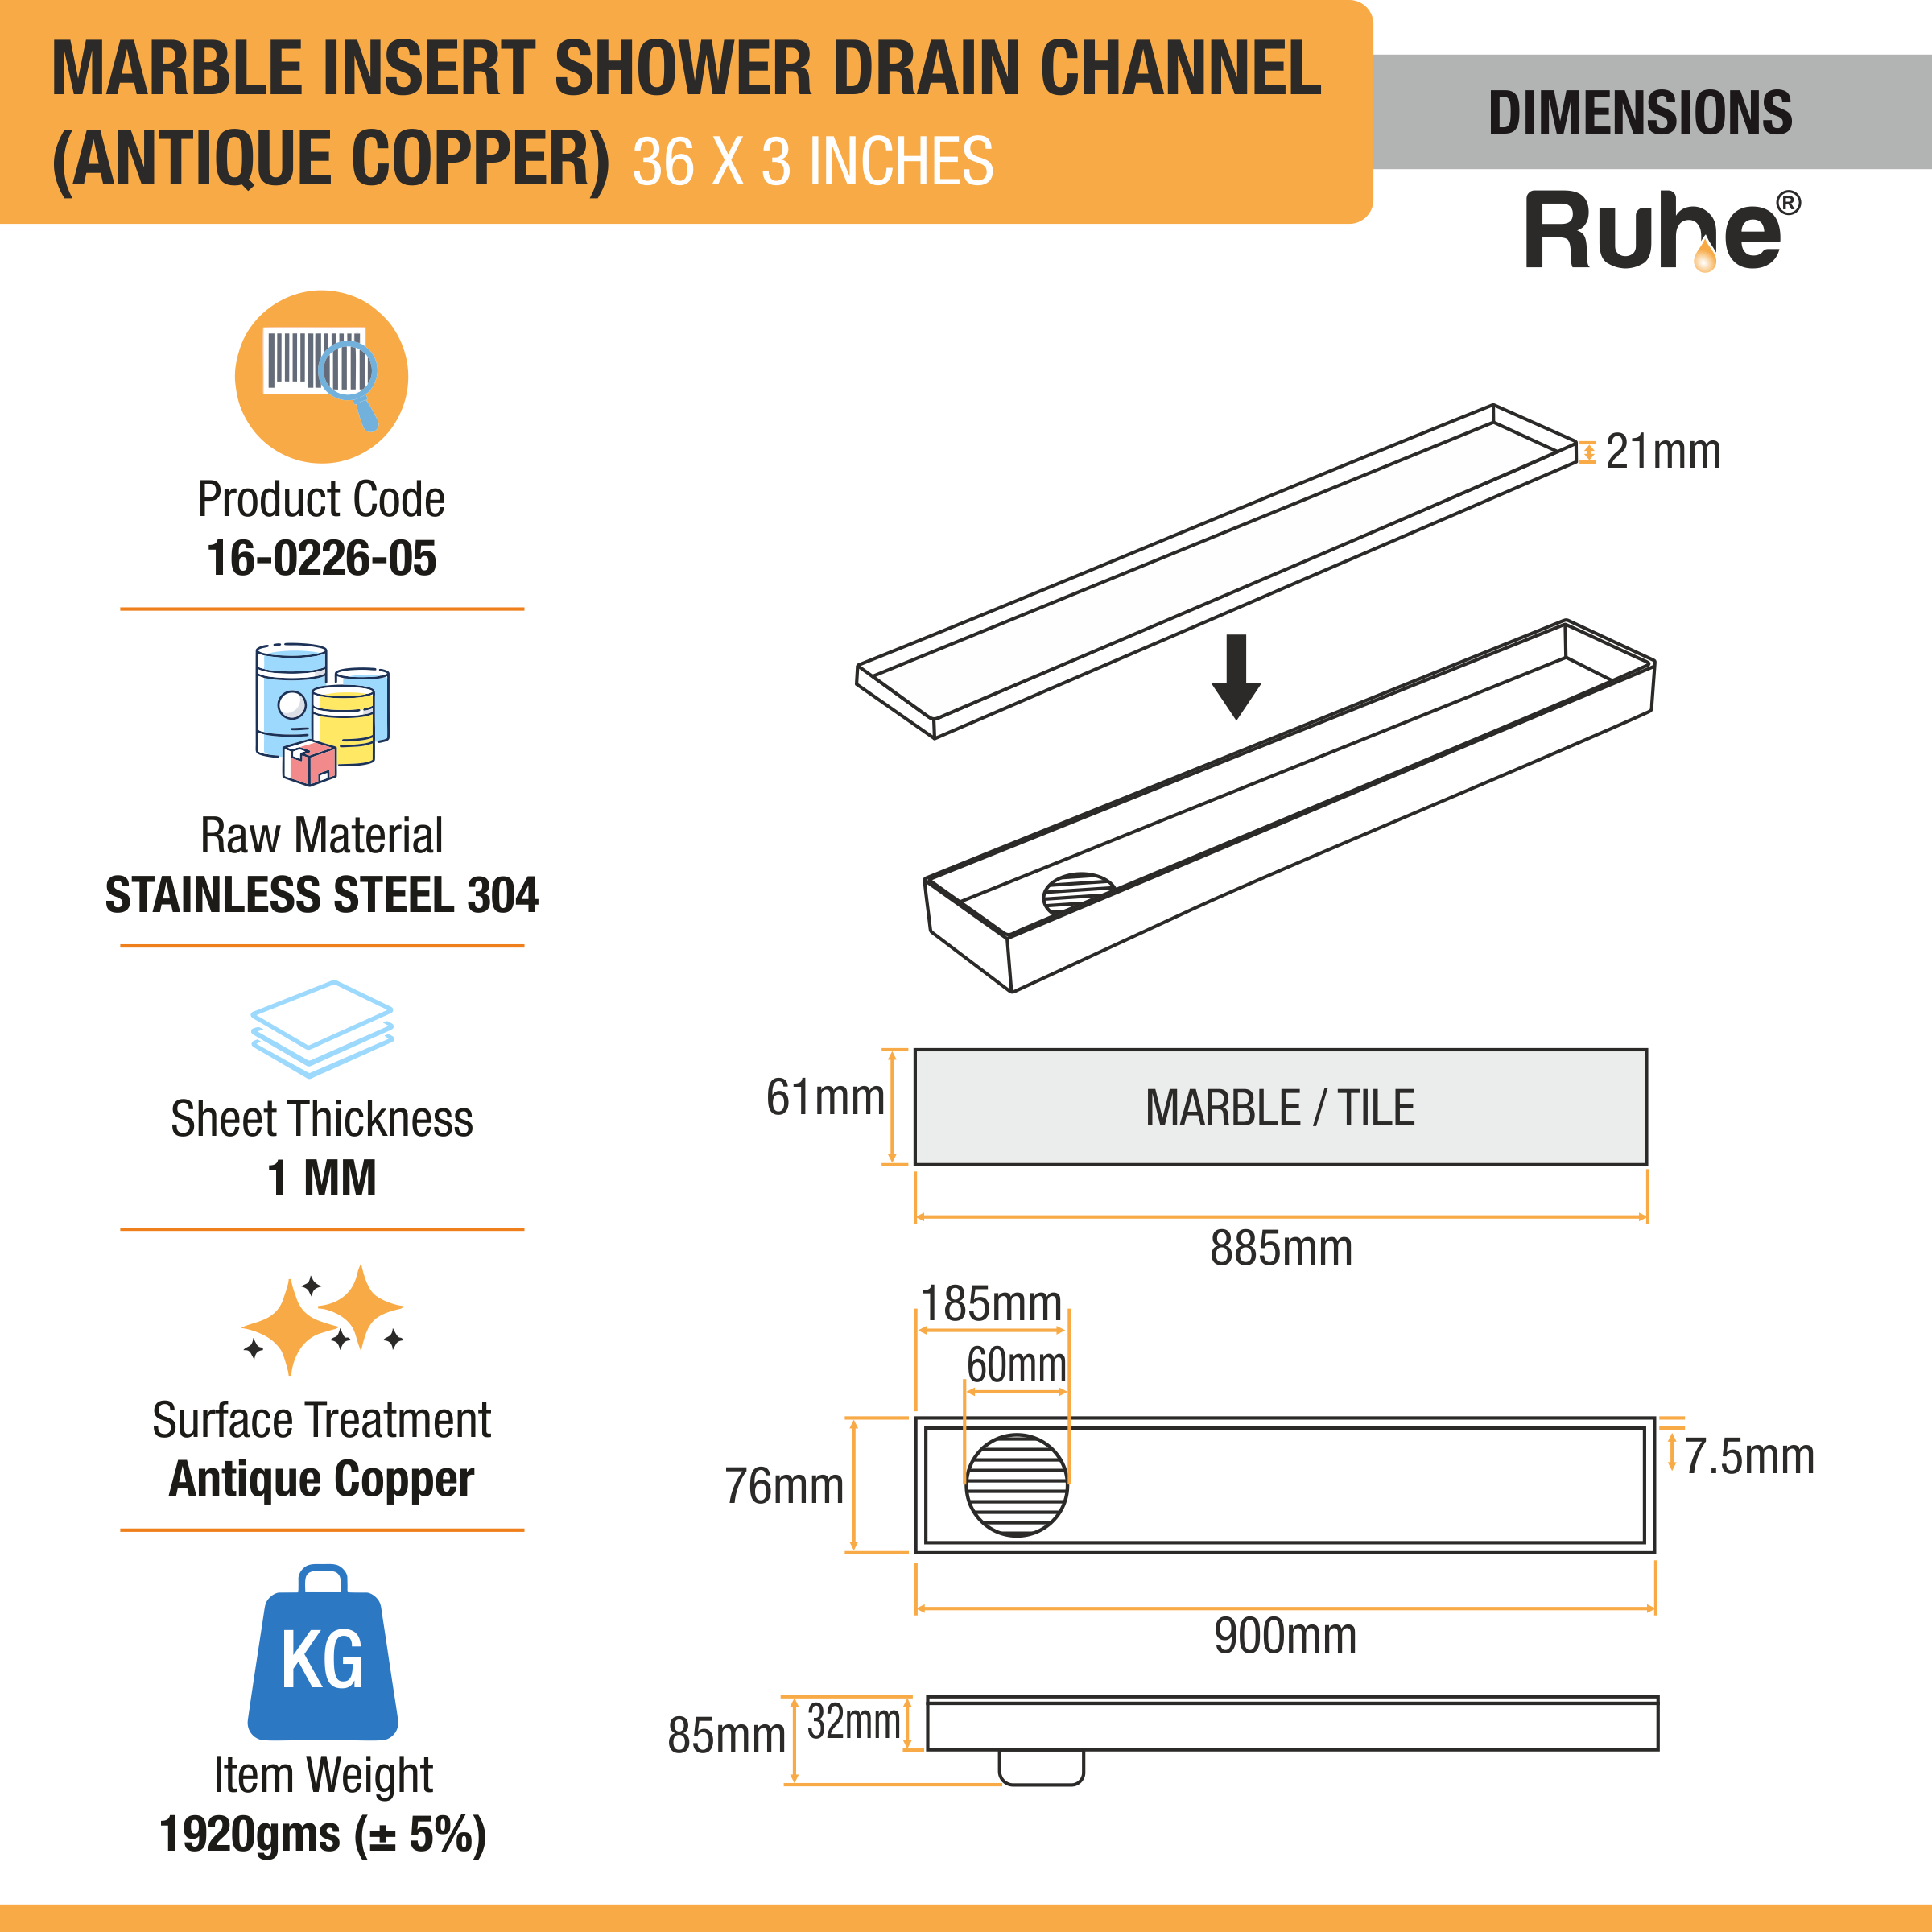 Marble Insert Shower Drain Channel (36 x 3 Inches) ROSE GOLD PVD Coated dimensions and sizes